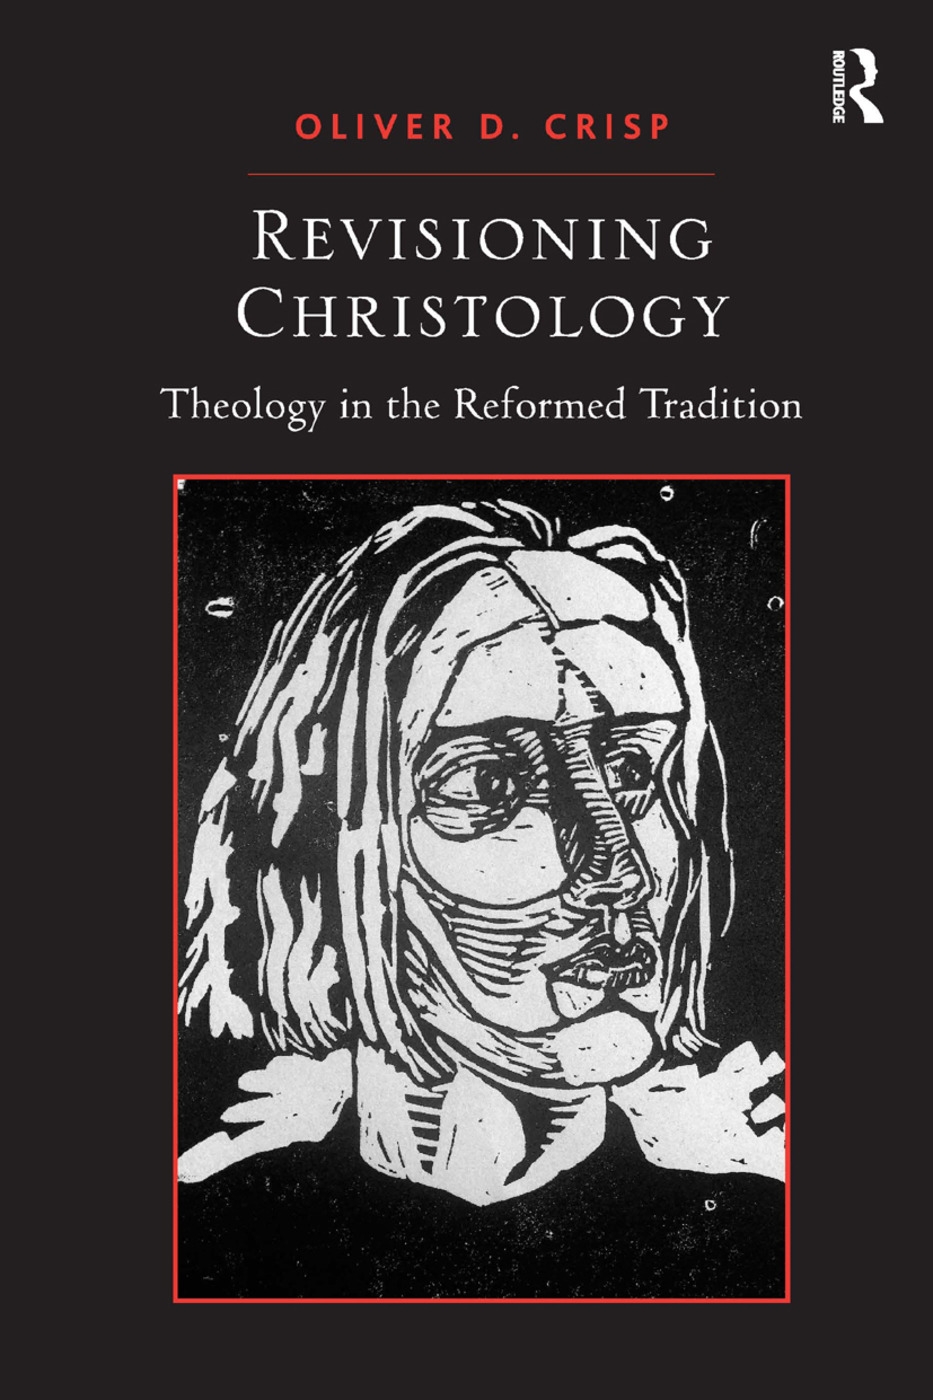 Revisioning Christology: Theology in the Reformed Tradition. Oliver D. Crisp